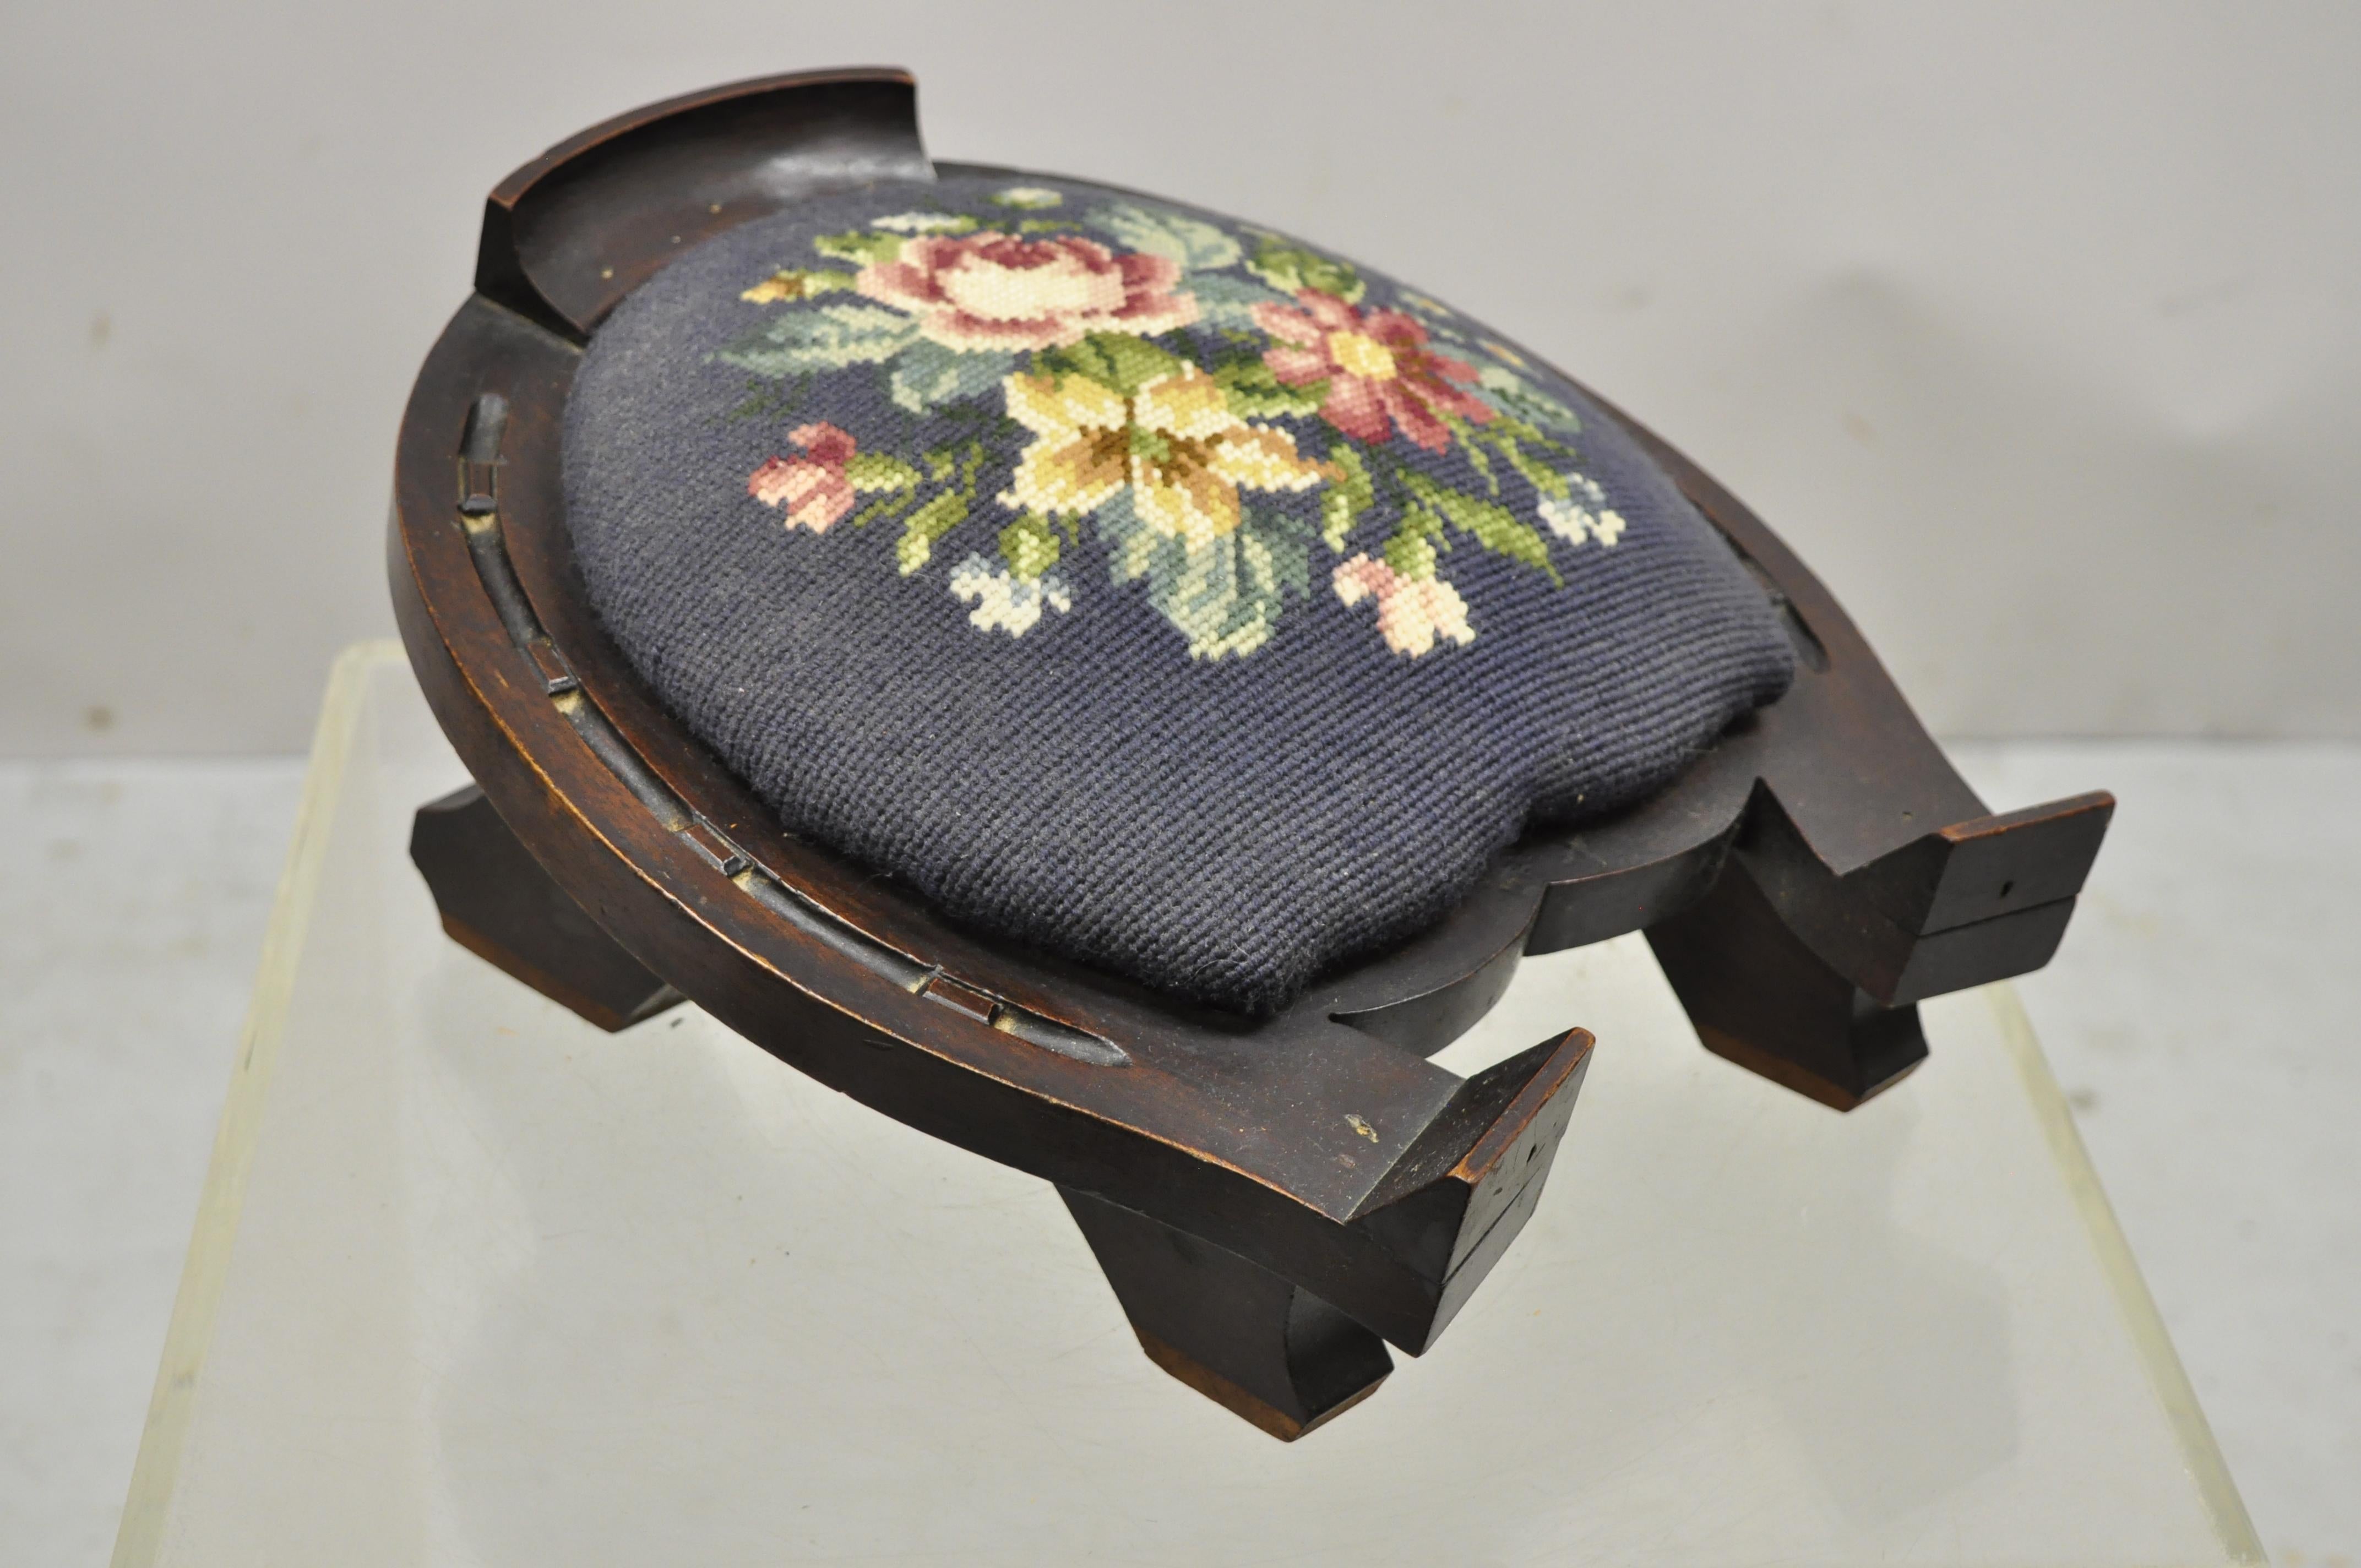 Victorian carved mahogany horseshoe needlepoint gout stool footstool ottoman. Item features floral needlepoint seat, solid wood frame, nicely carved details, very nice antique item. Circa 1900s. Measurements: 7